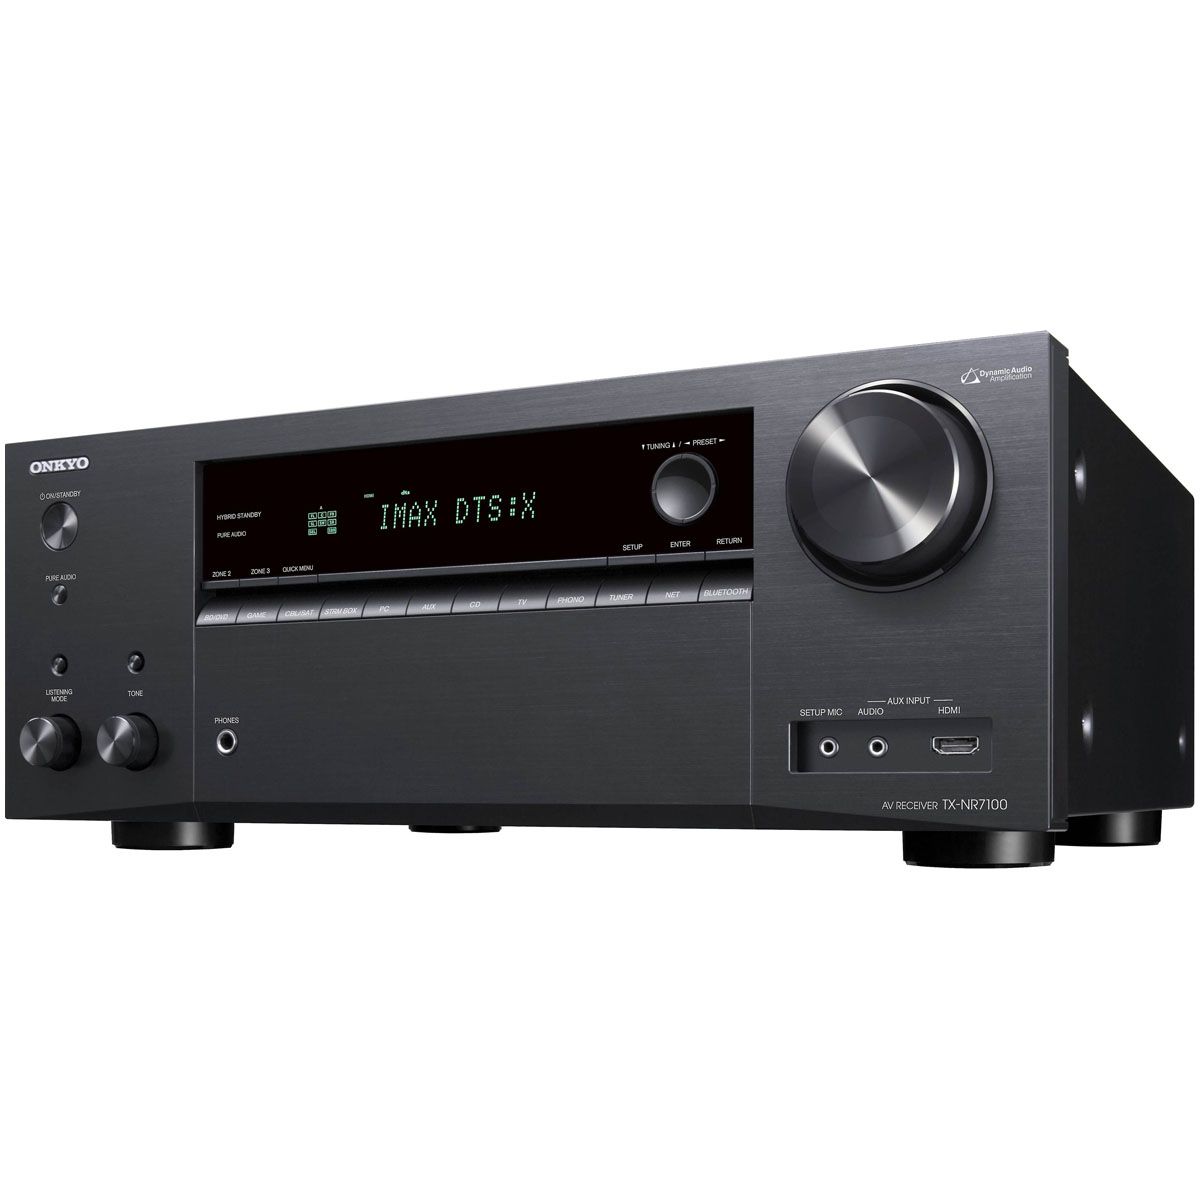 Onkyo TX-NR7100 9.2 Channel AV Receiver - angled front view